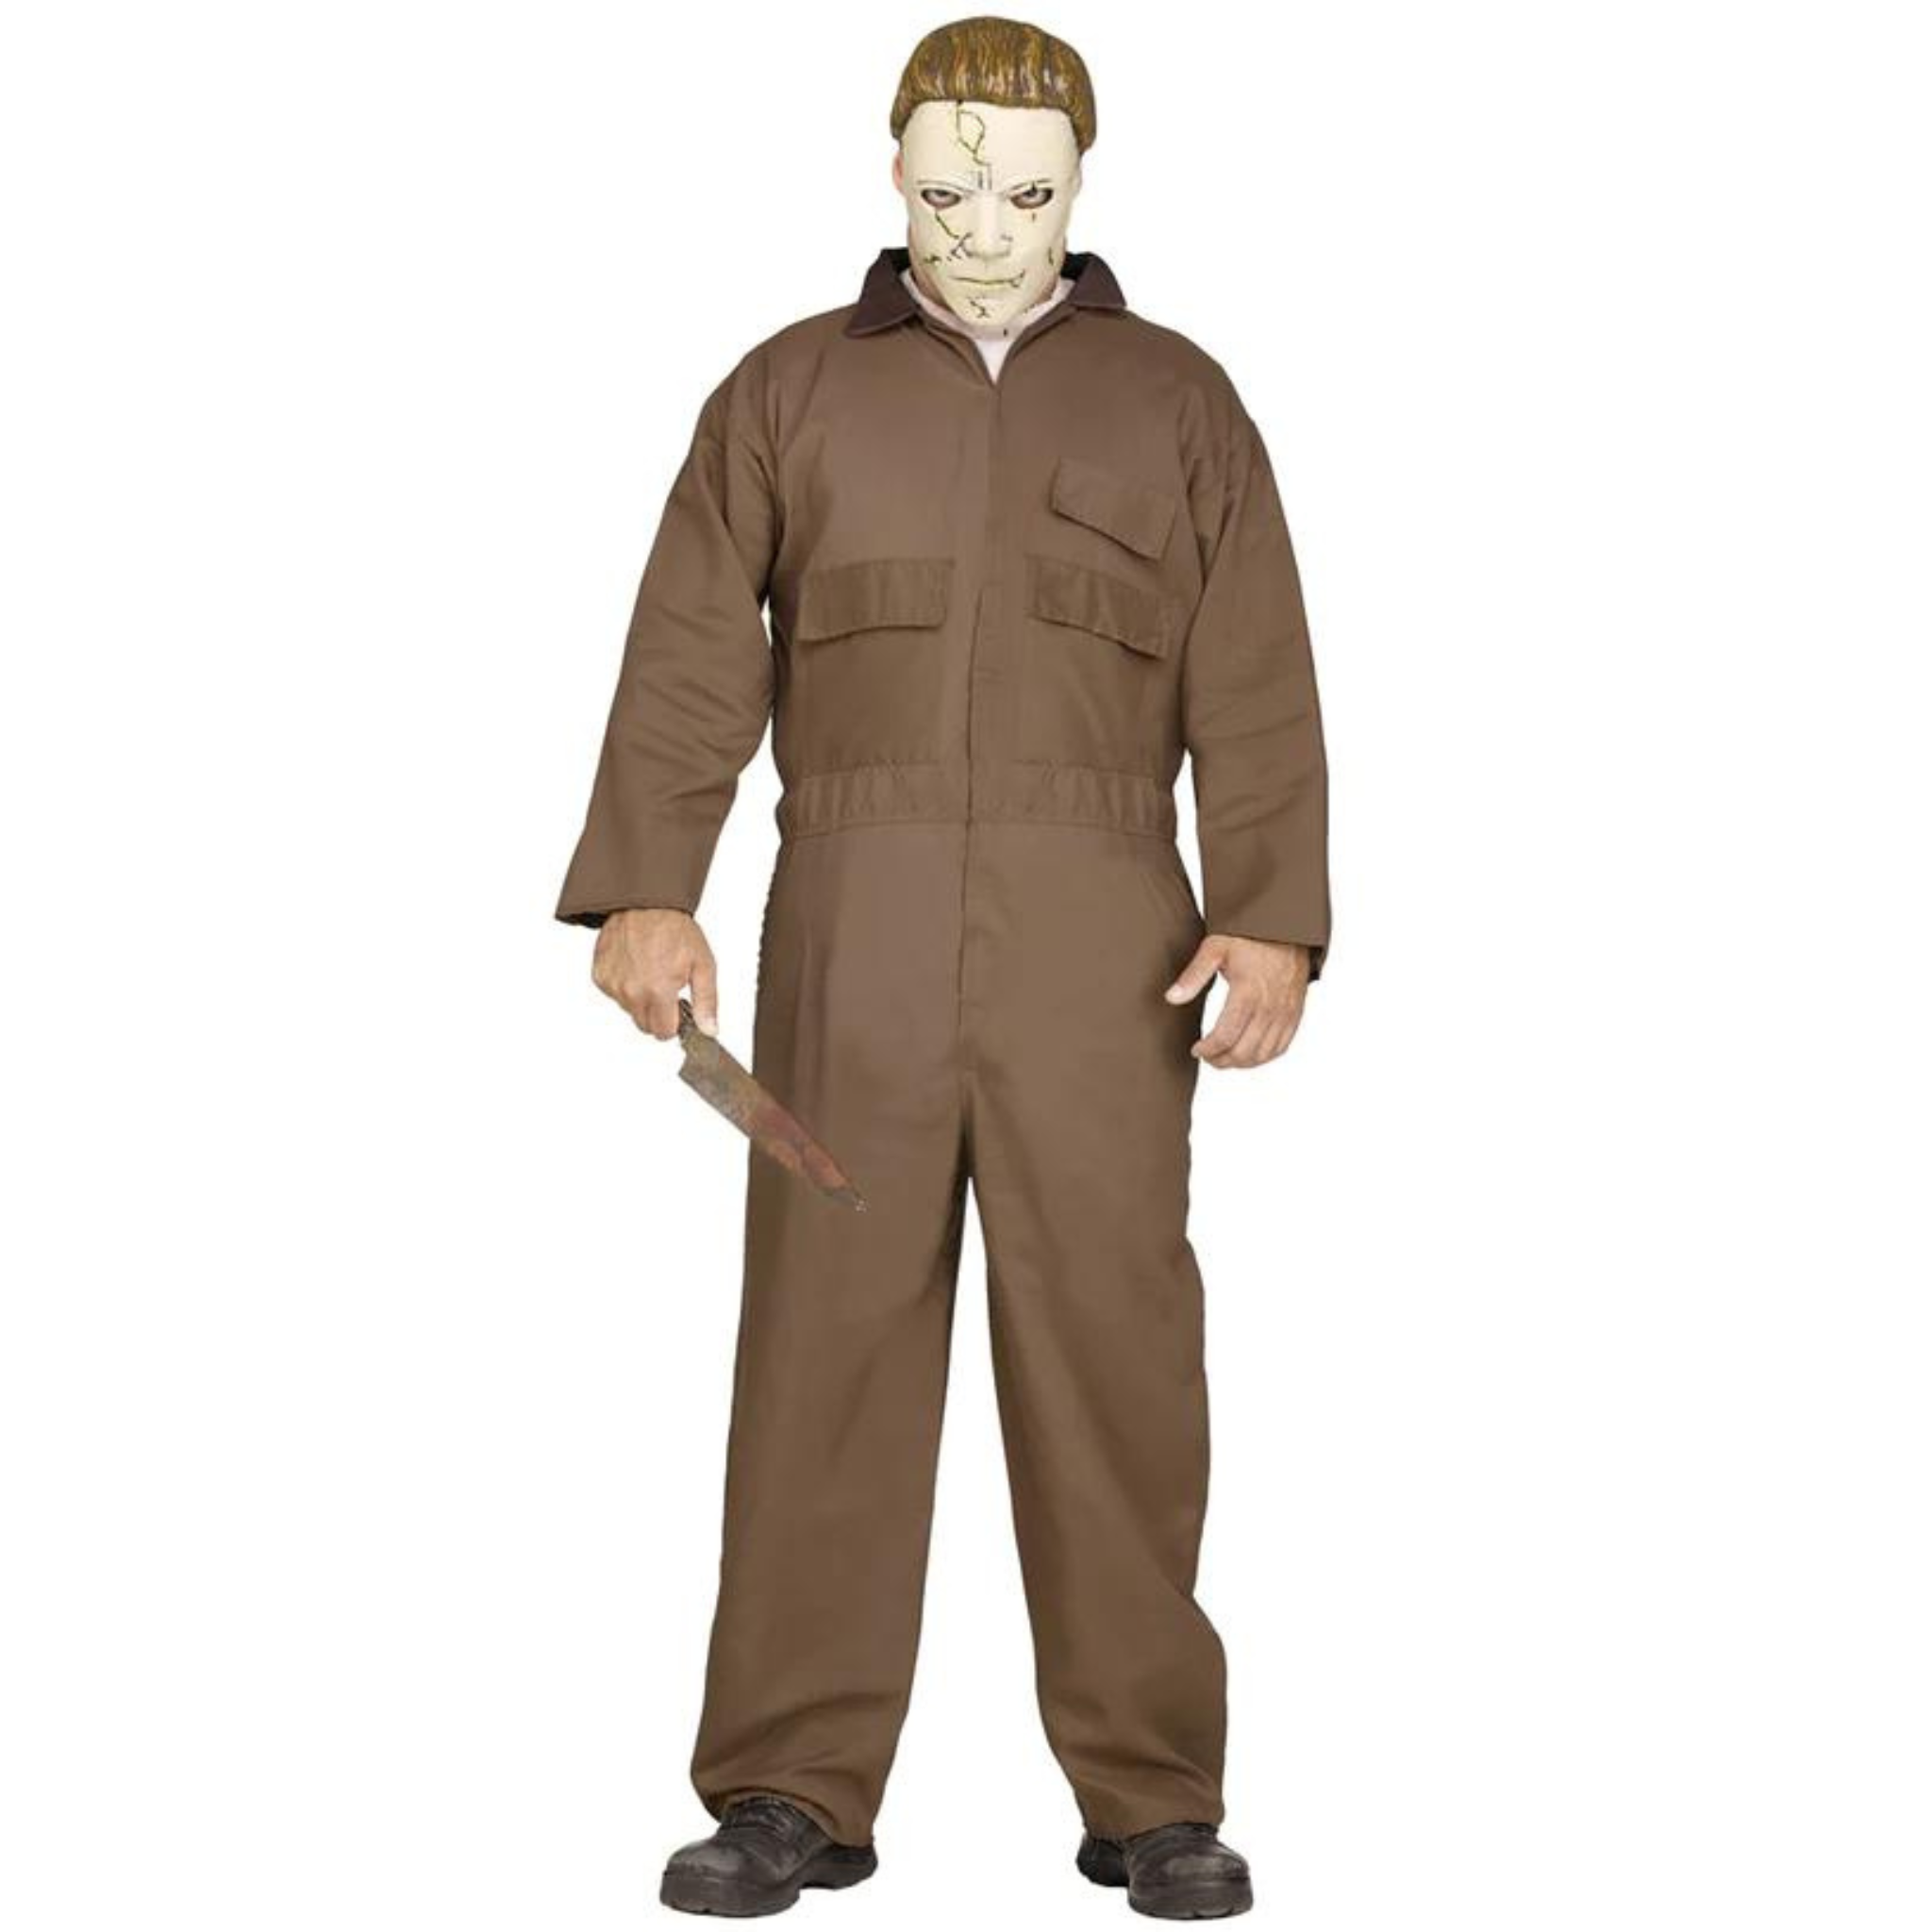 Adult costume with Michael Myers mask